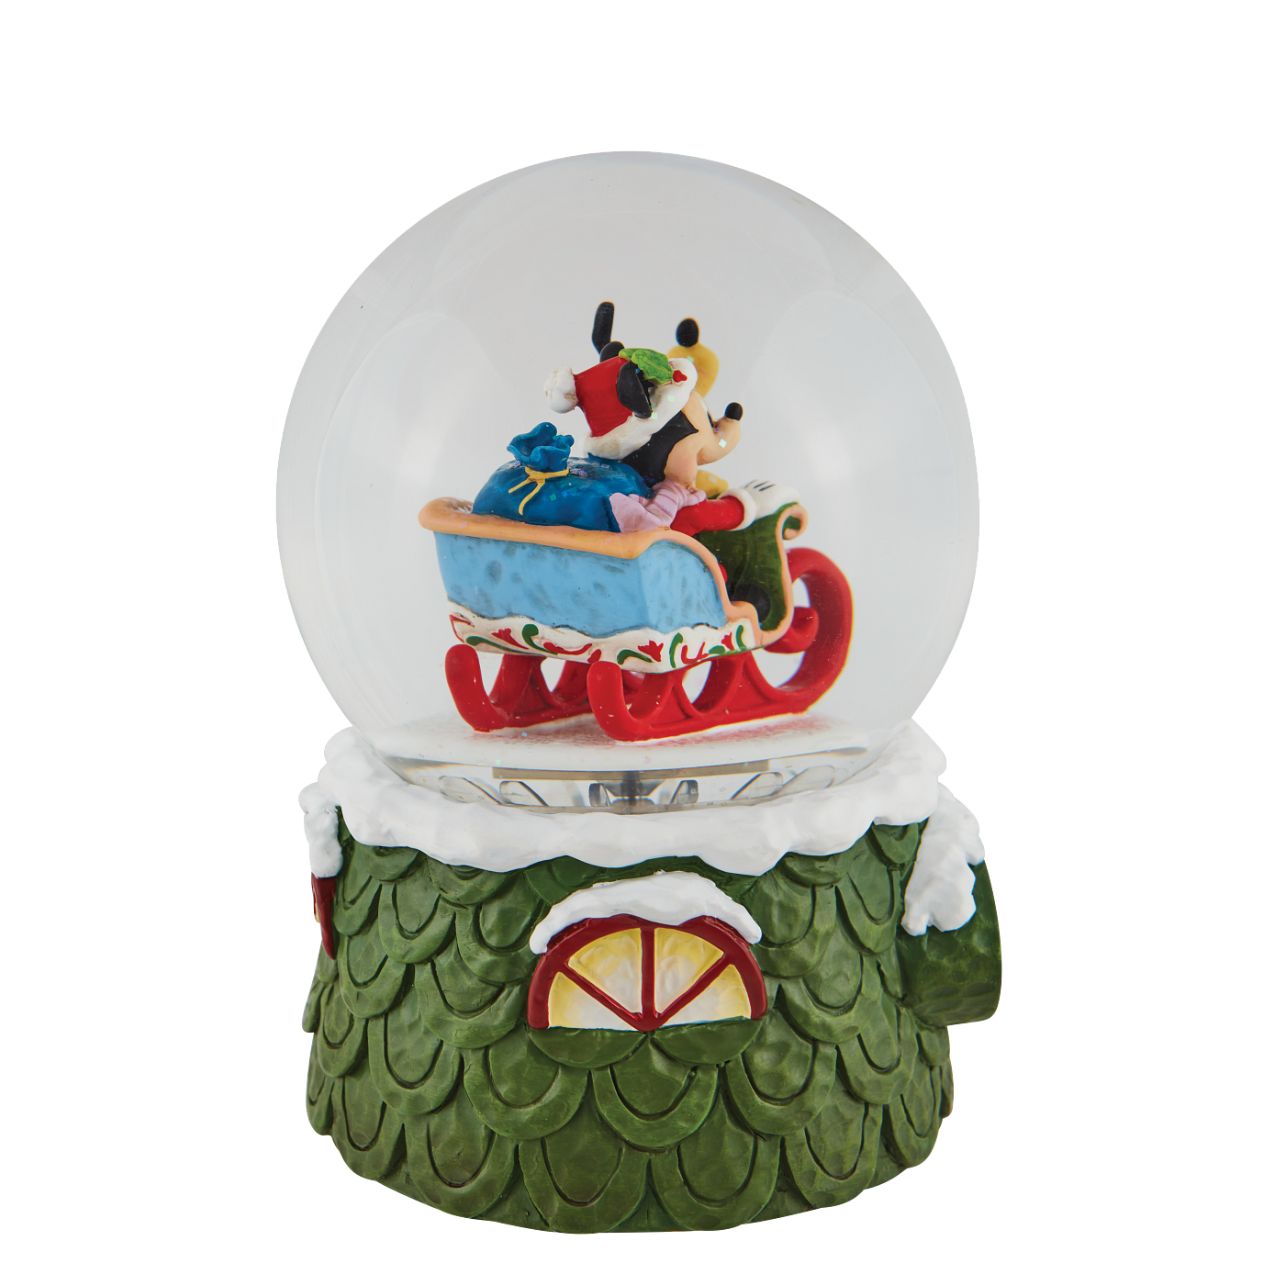 Disney Mickey and Pluto Christmas Waterball  "Laughing All the Way" Make it snow all season long with this exquisitely crafted Disney snow globe by Jim Shore. Mickey plays Santa with his trusty steed, Pluto, riding shotgun.